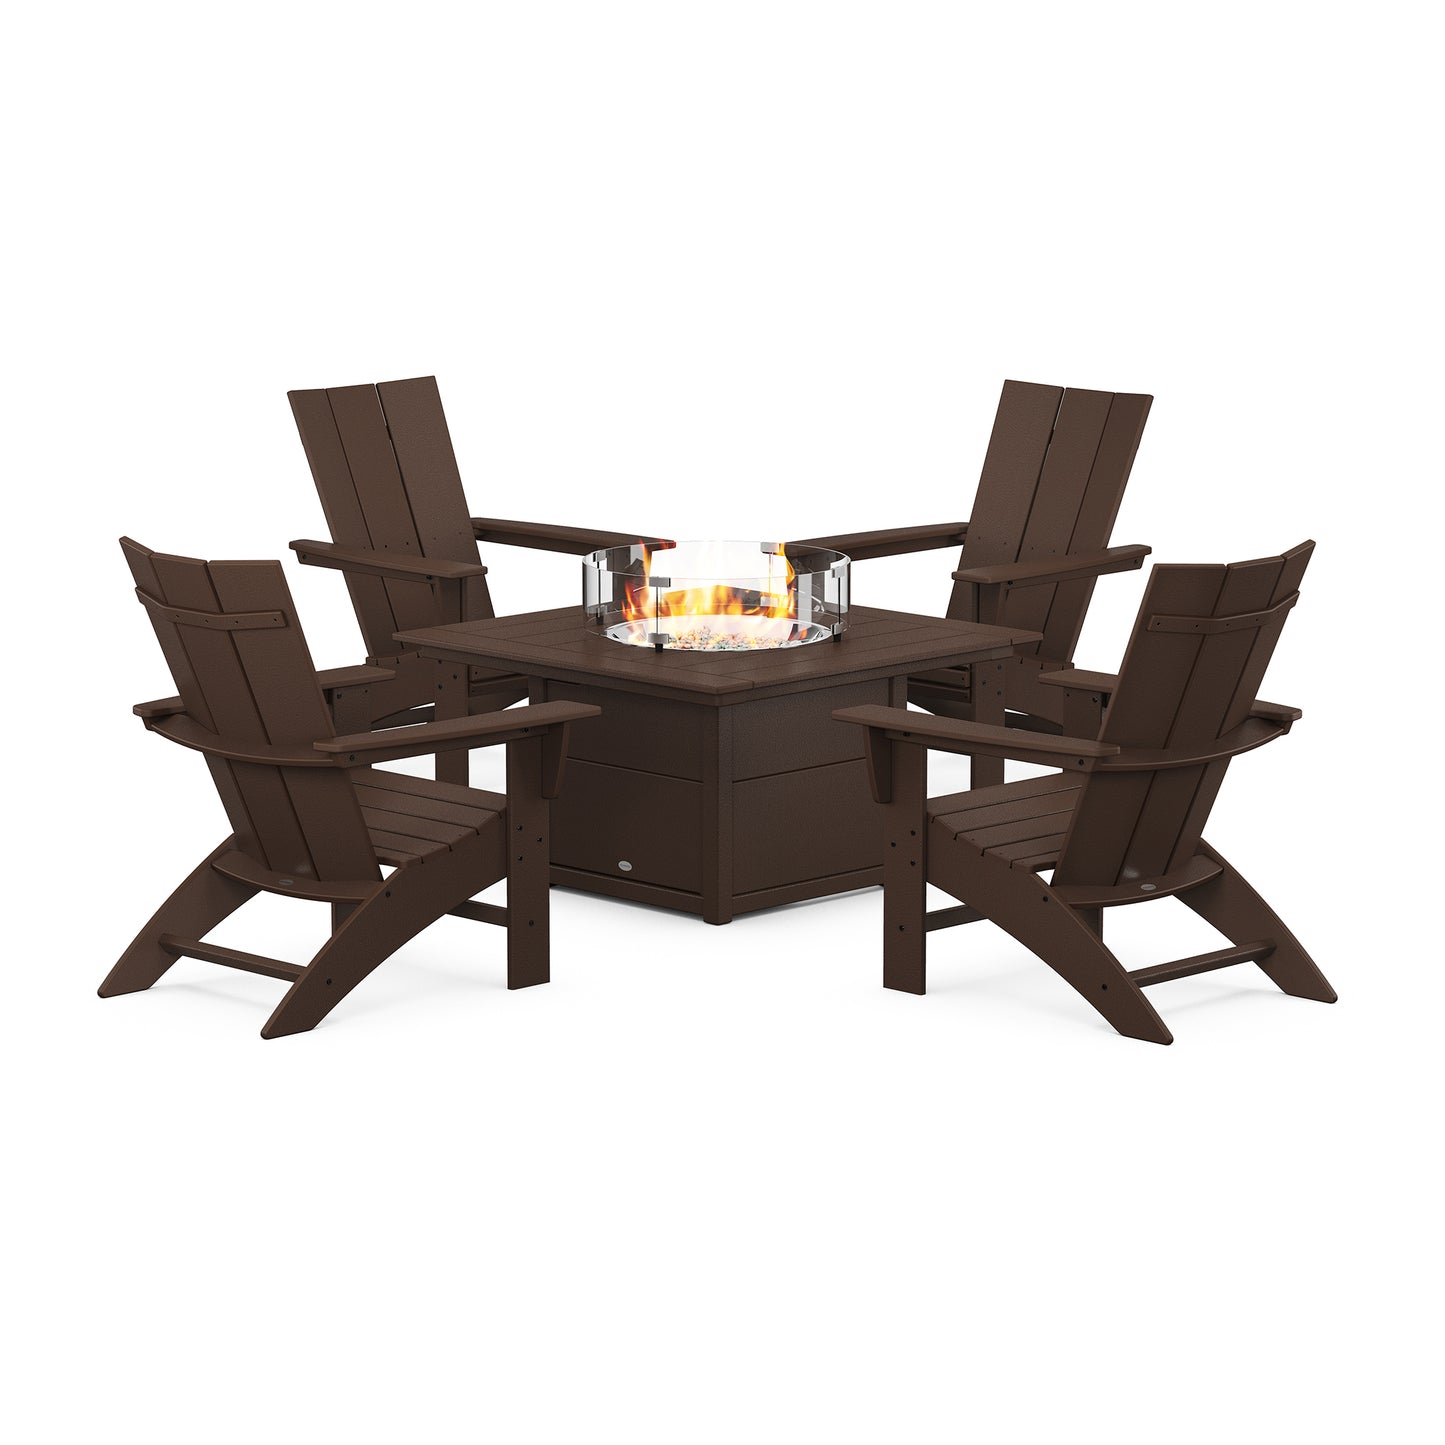 Four POLYWOOD® Modern Curveback Adirondack 5-Piece Conversation Sets with Fire Pit Table arranged around a square outdoor fire pit table with visible flames, isolated on a white background.